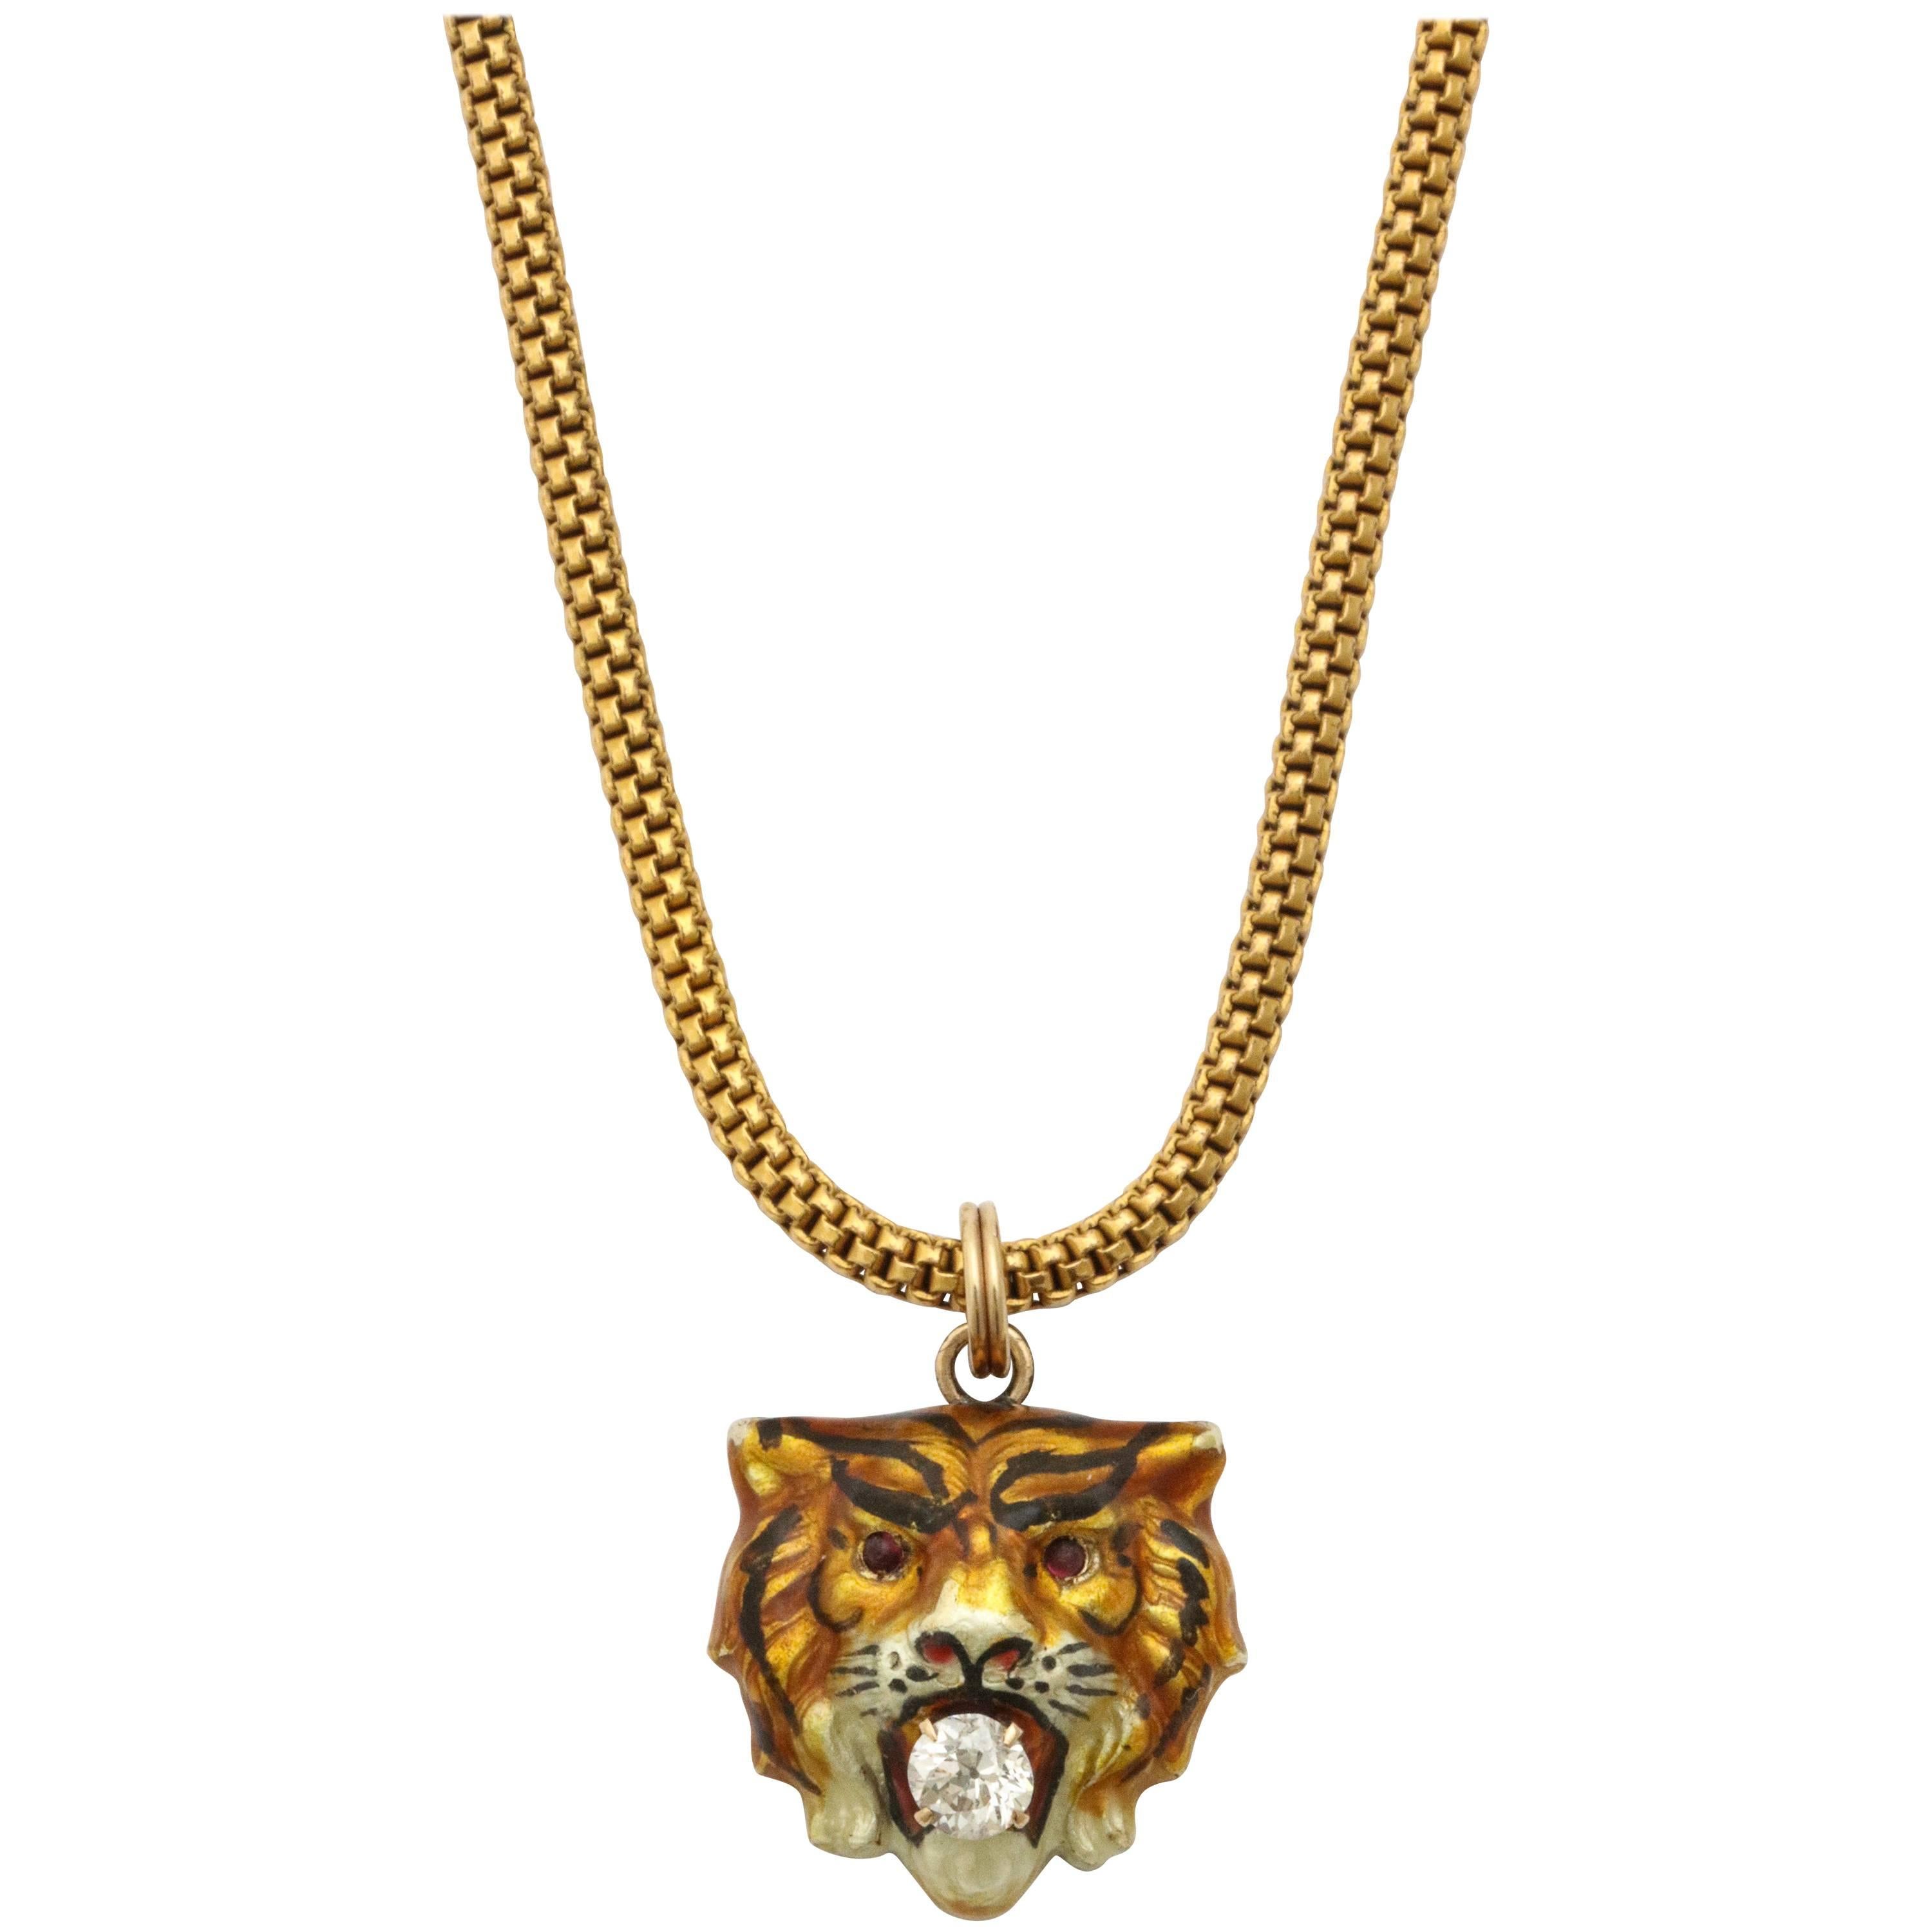 Enamel and Diamond Tiger Pendant on a Gold Chain